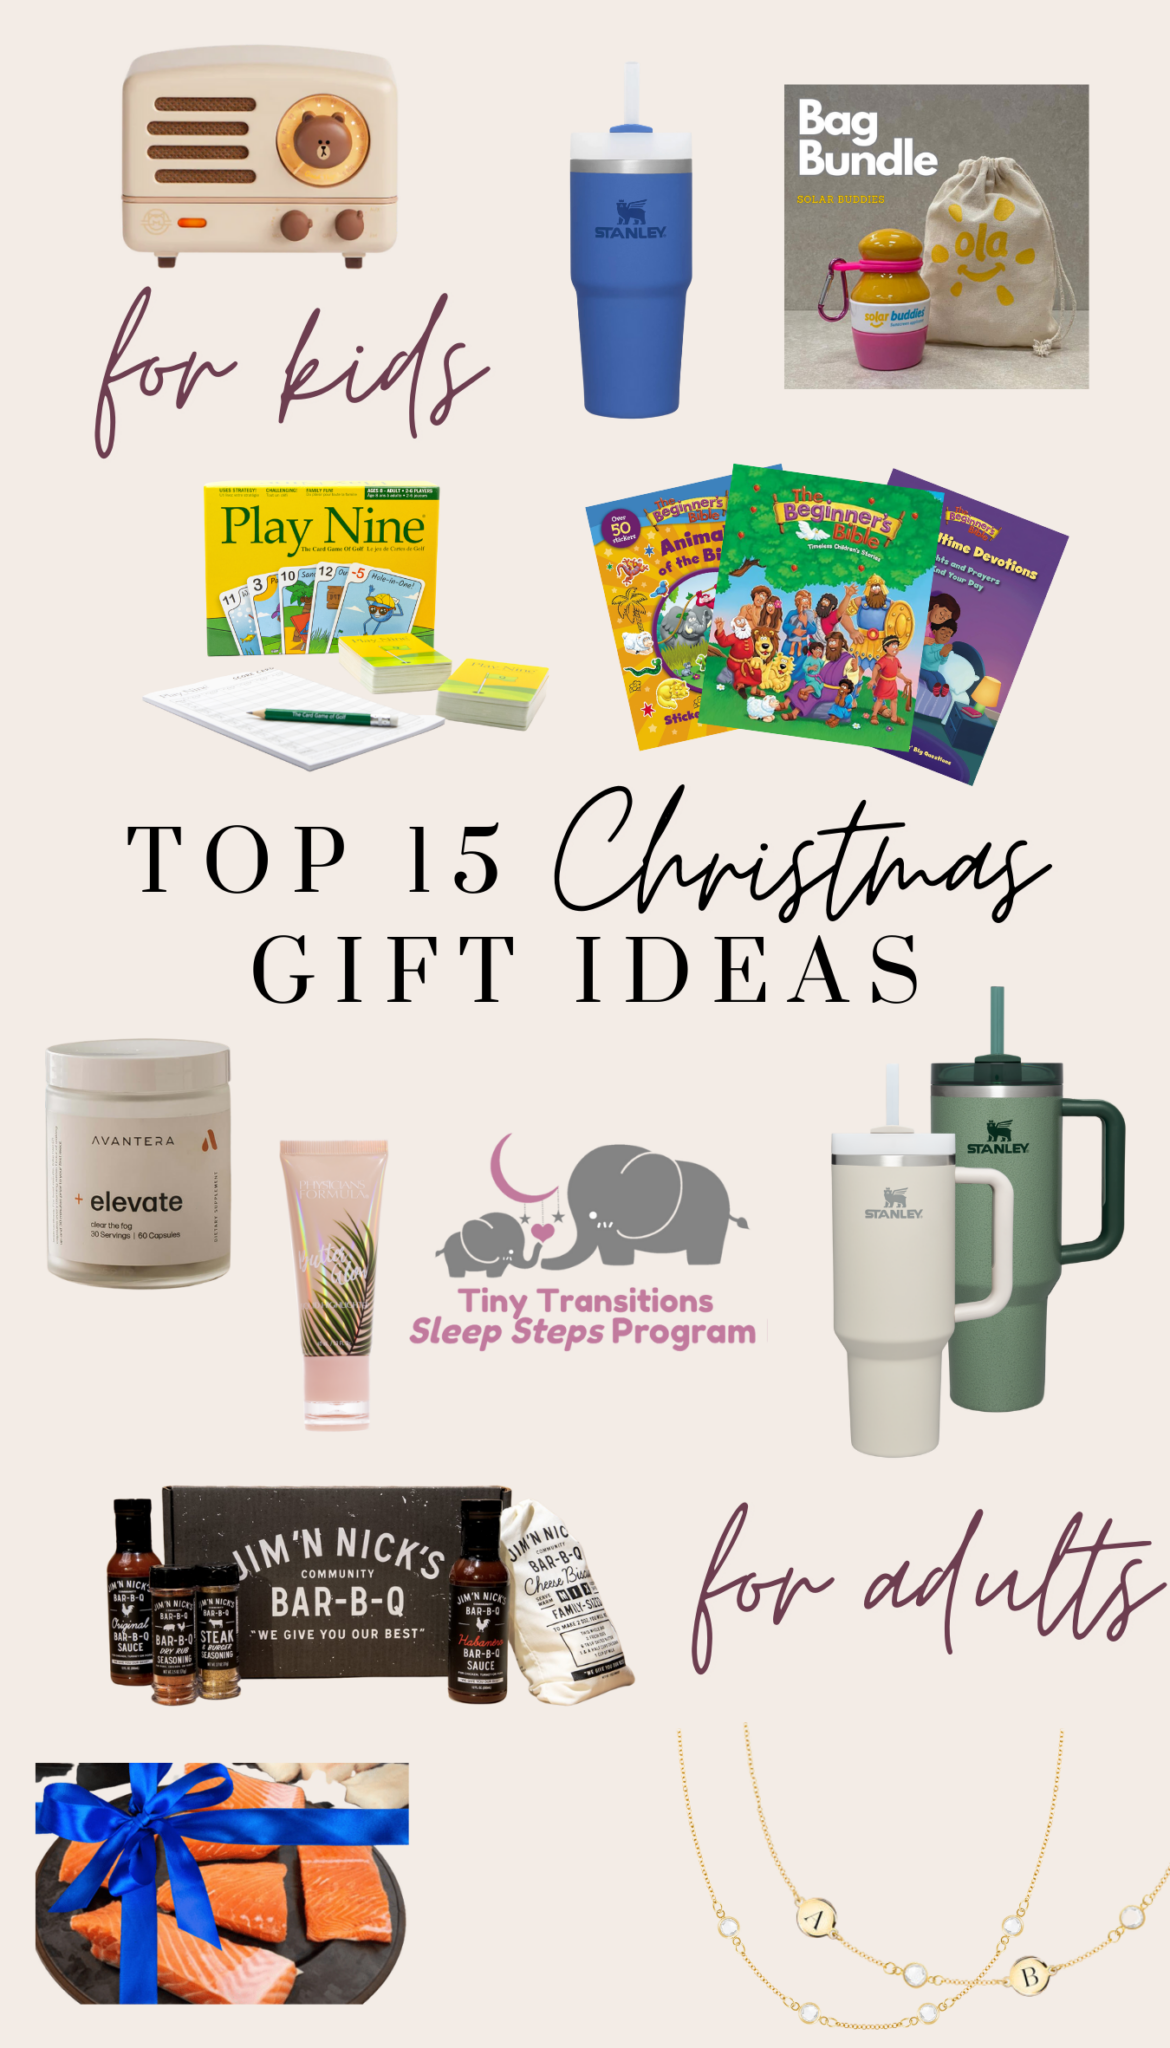 Best Gift Ideas for Everyone – Babies to Adults - Everyday Savvy